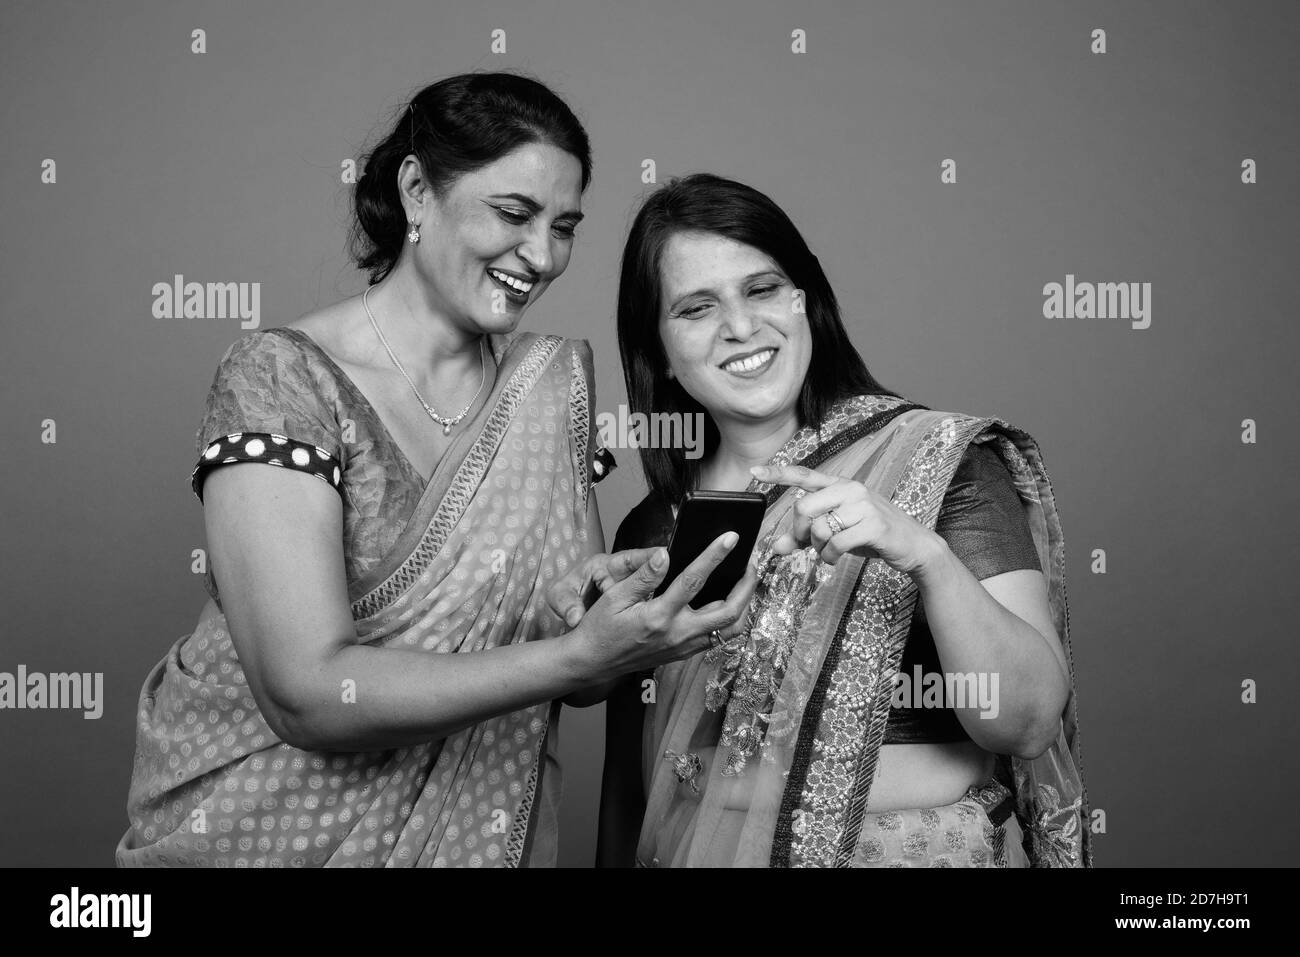 Two mature Indian women wearing Sari Indian traditional clothes together Stock Photo